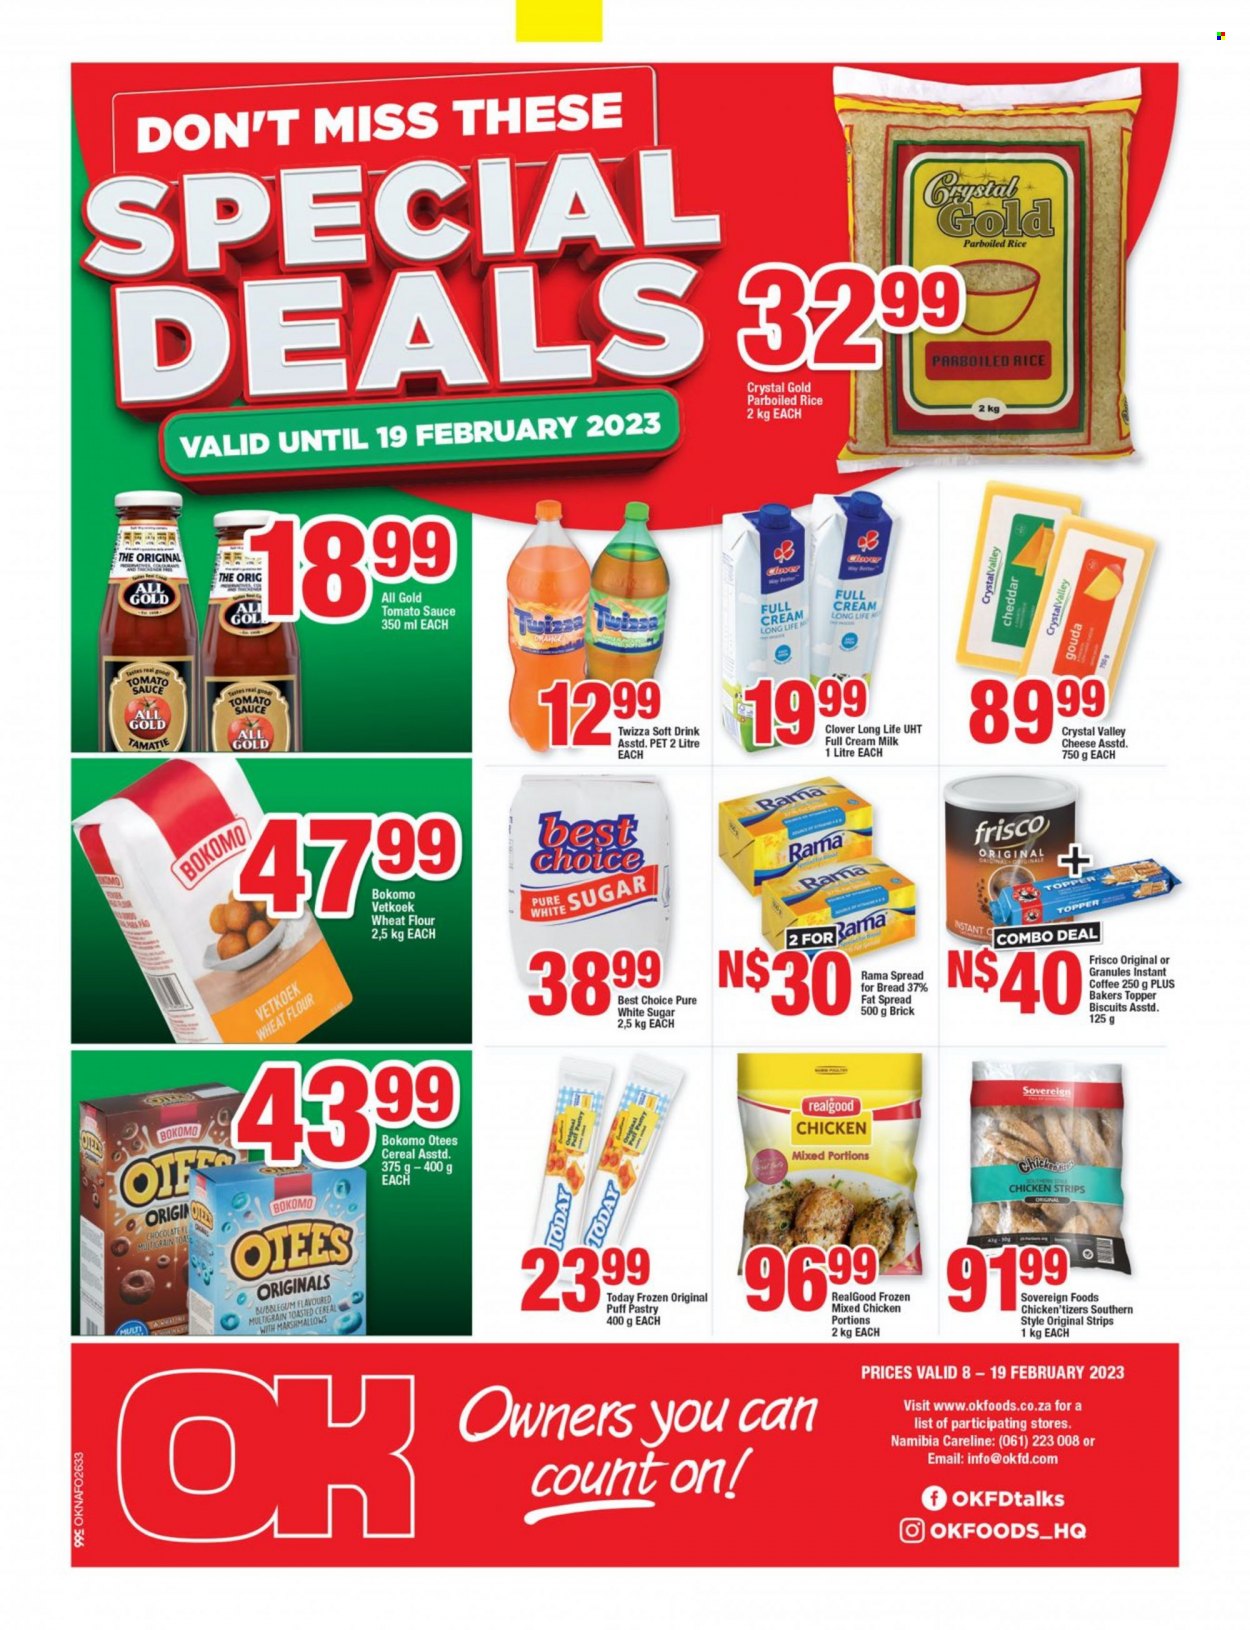 thumbnail - OK catalogue  - 08/02/2023 - 19/02/2023 - Sales products - bread, sauce, cheddar, cheese, Clover, long life milk, fat spread, Rama, puff pastry, strips, chicken strips, marshmallows, chocolate, bubblegum, biscuit, flour, sugar, wheat flour, tomato sauce, cereals, rice, parboiled rice, soft drink, coffee, instant coffee, Frisco. Page 1.